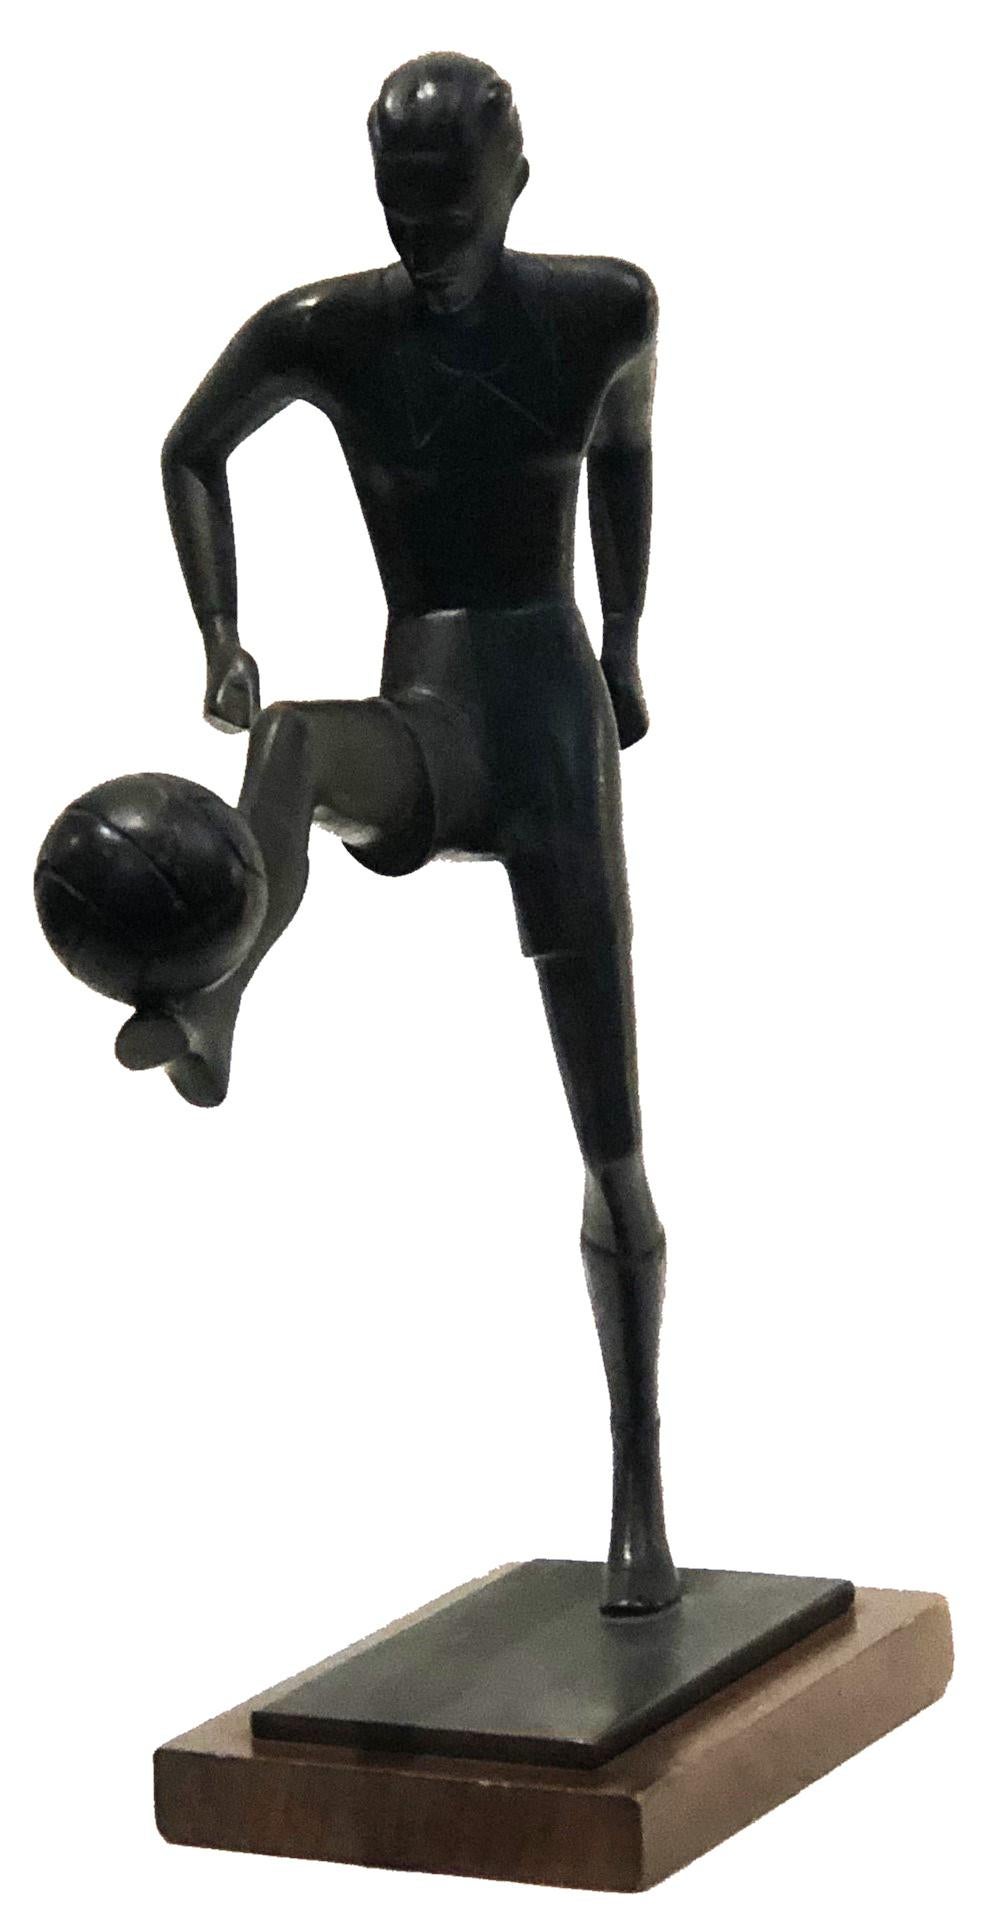 Art Deco
Soccer Player
Patinated Bronze Sculpture
Germany, ca. 1930’s

DIMENSIONS
Height: 9.5 inches            Width: 6.75 inches            Depth: 2.75 inches

ABOUT
A rare, laconic, dynamic and expressive collectible tabletop sculpture. The tense